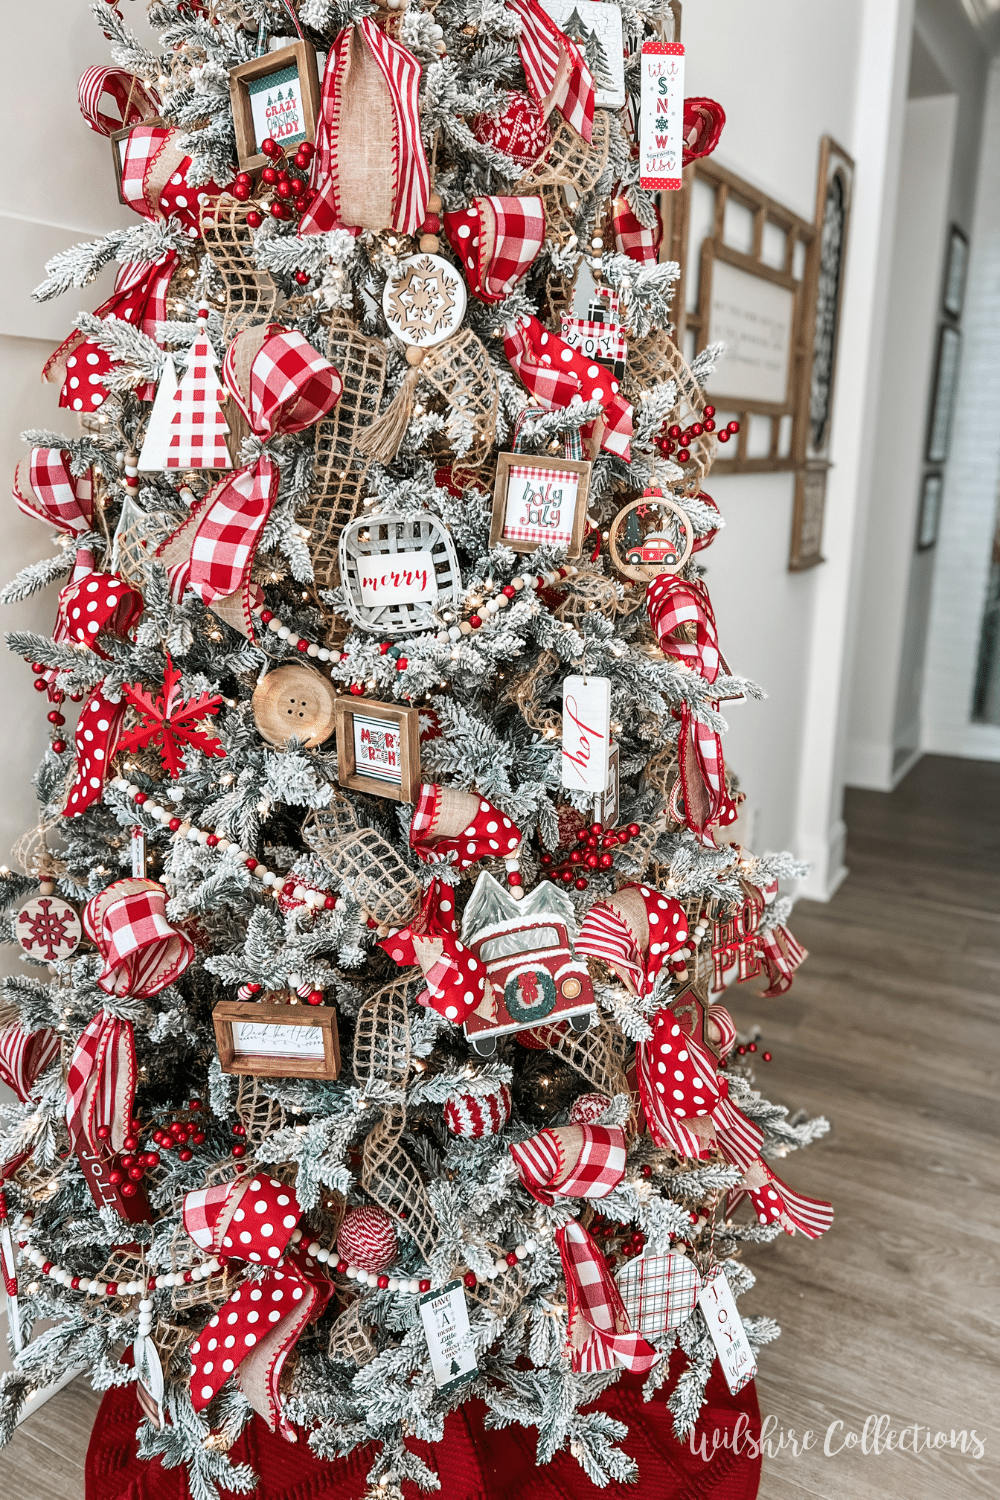 How to decorate a Christmas tree with ribbon